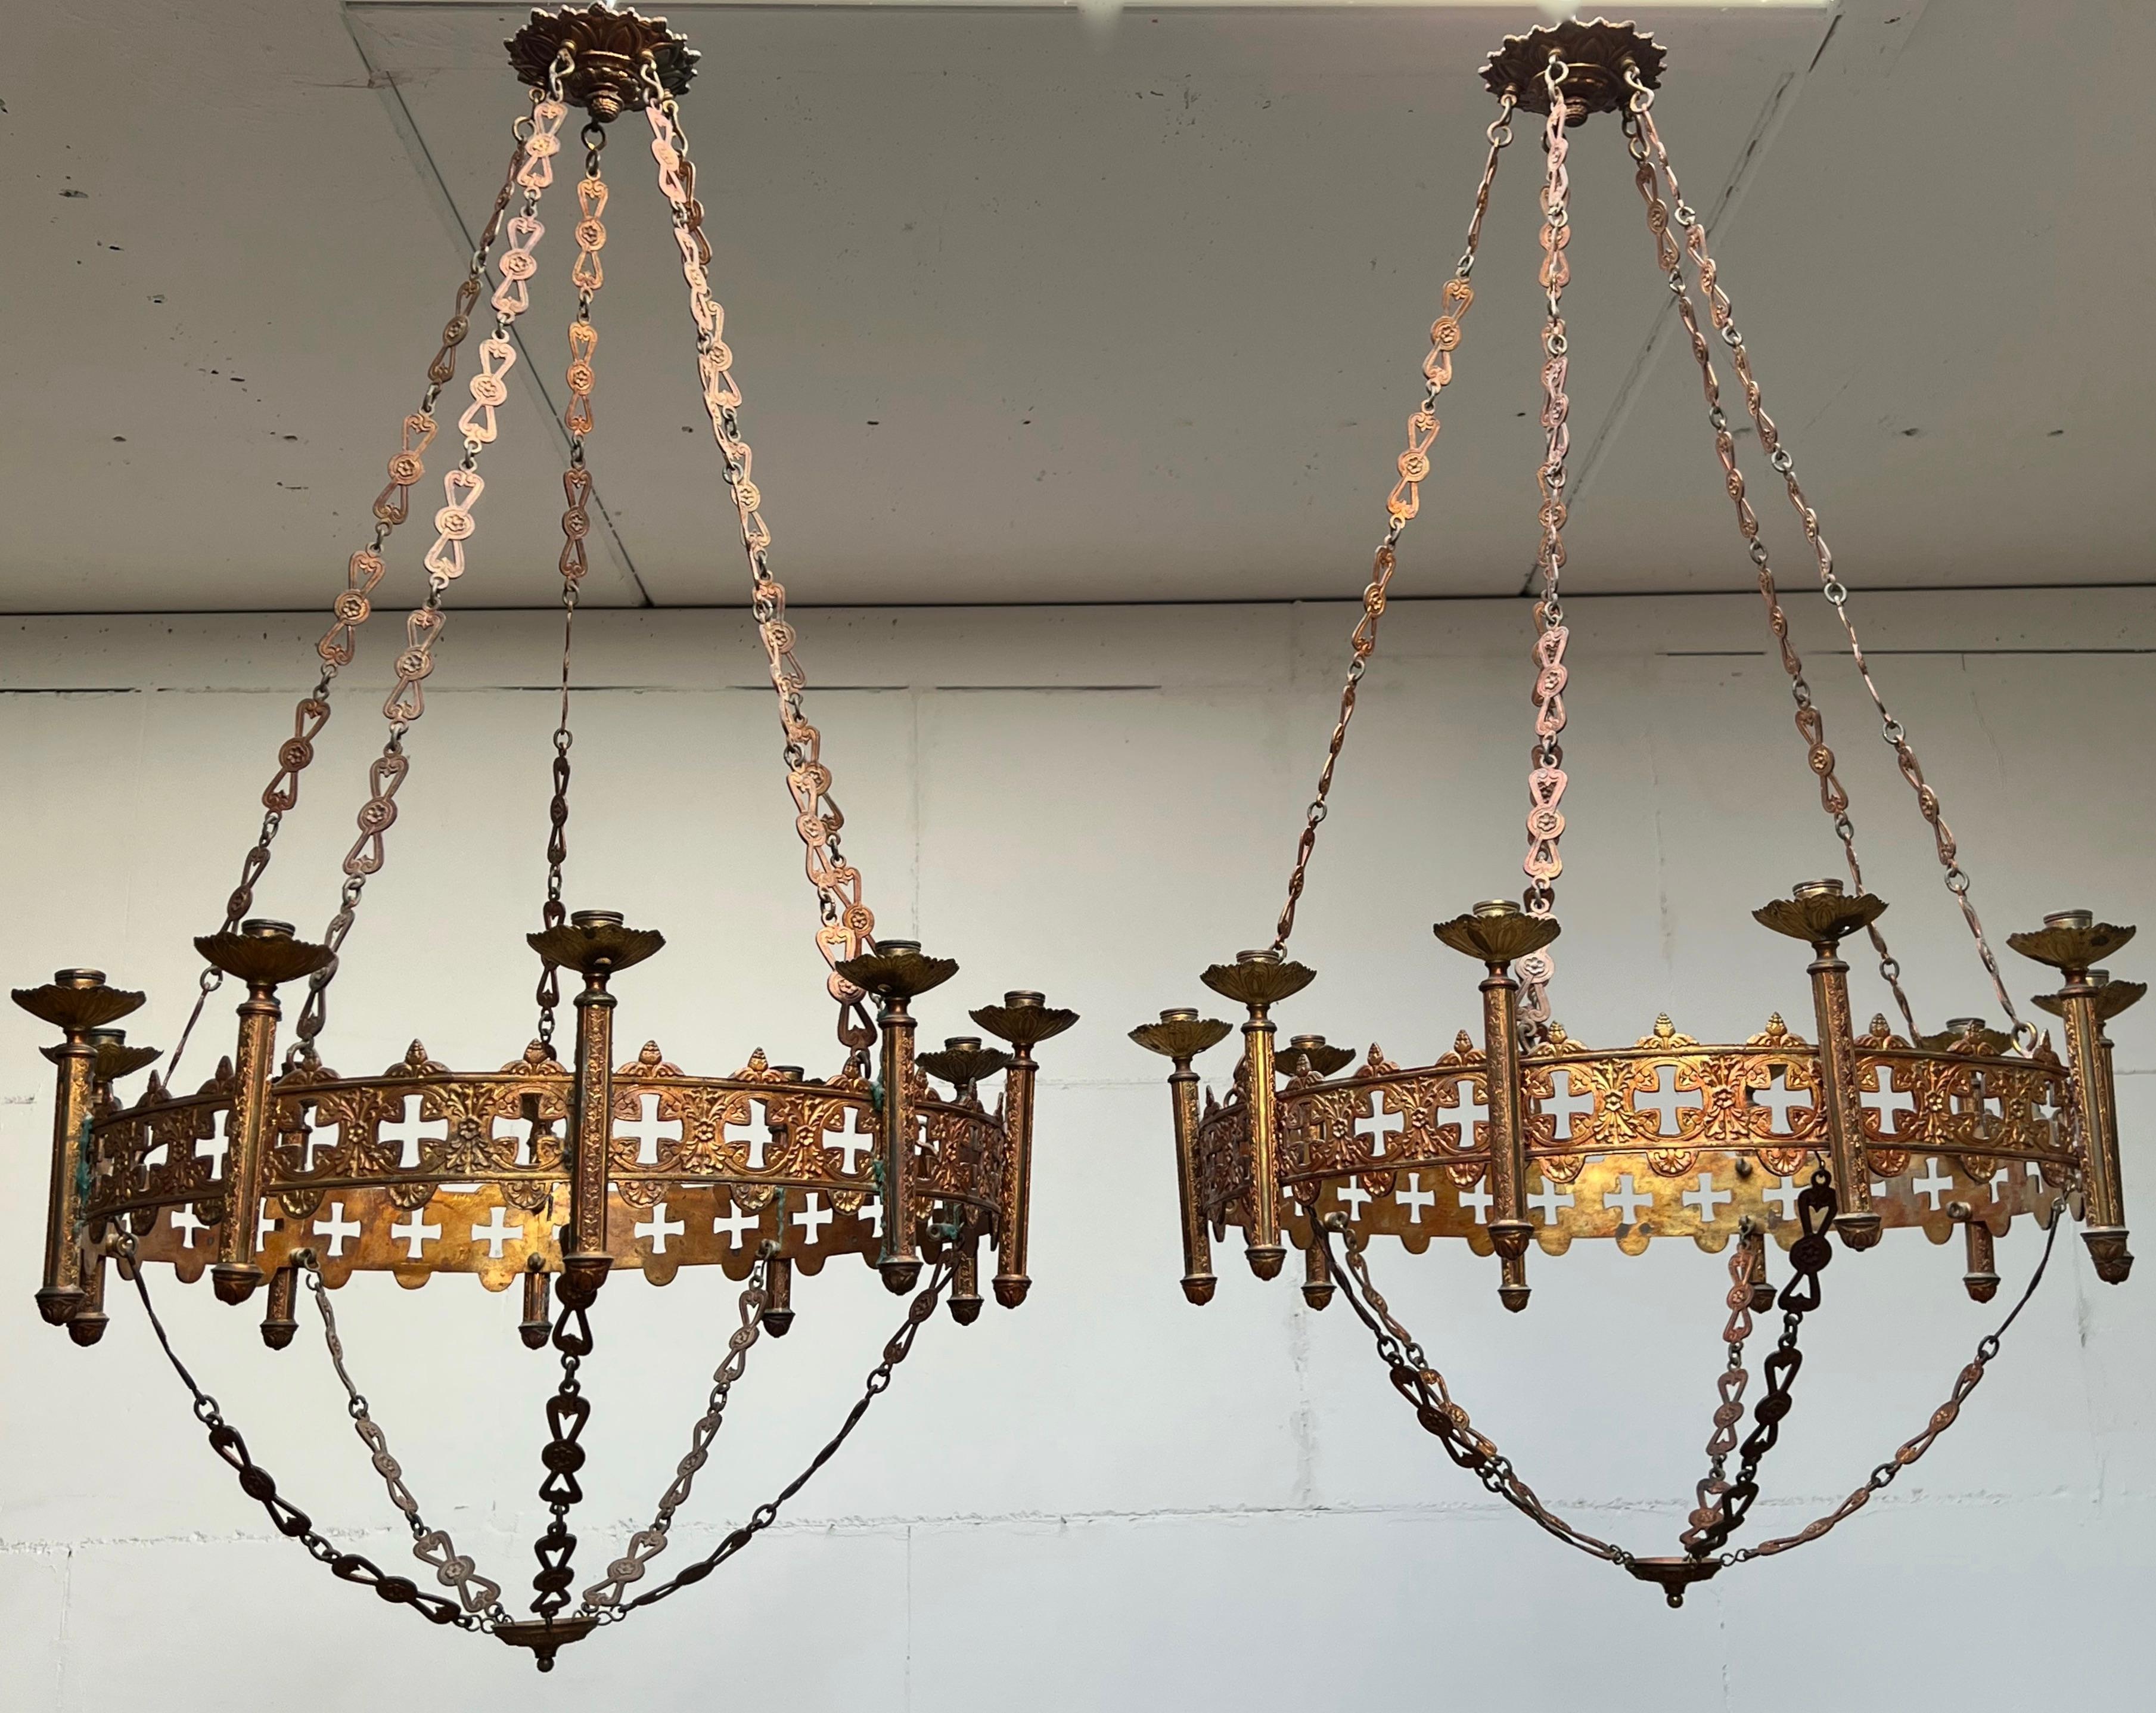 Beautiful and meaningful church or monastery relics from the late 1800s.

These impressive and all handcrafted candle chandeliers from the late 19th century are designed in the shape of an advent wreath and this large pair can also be made